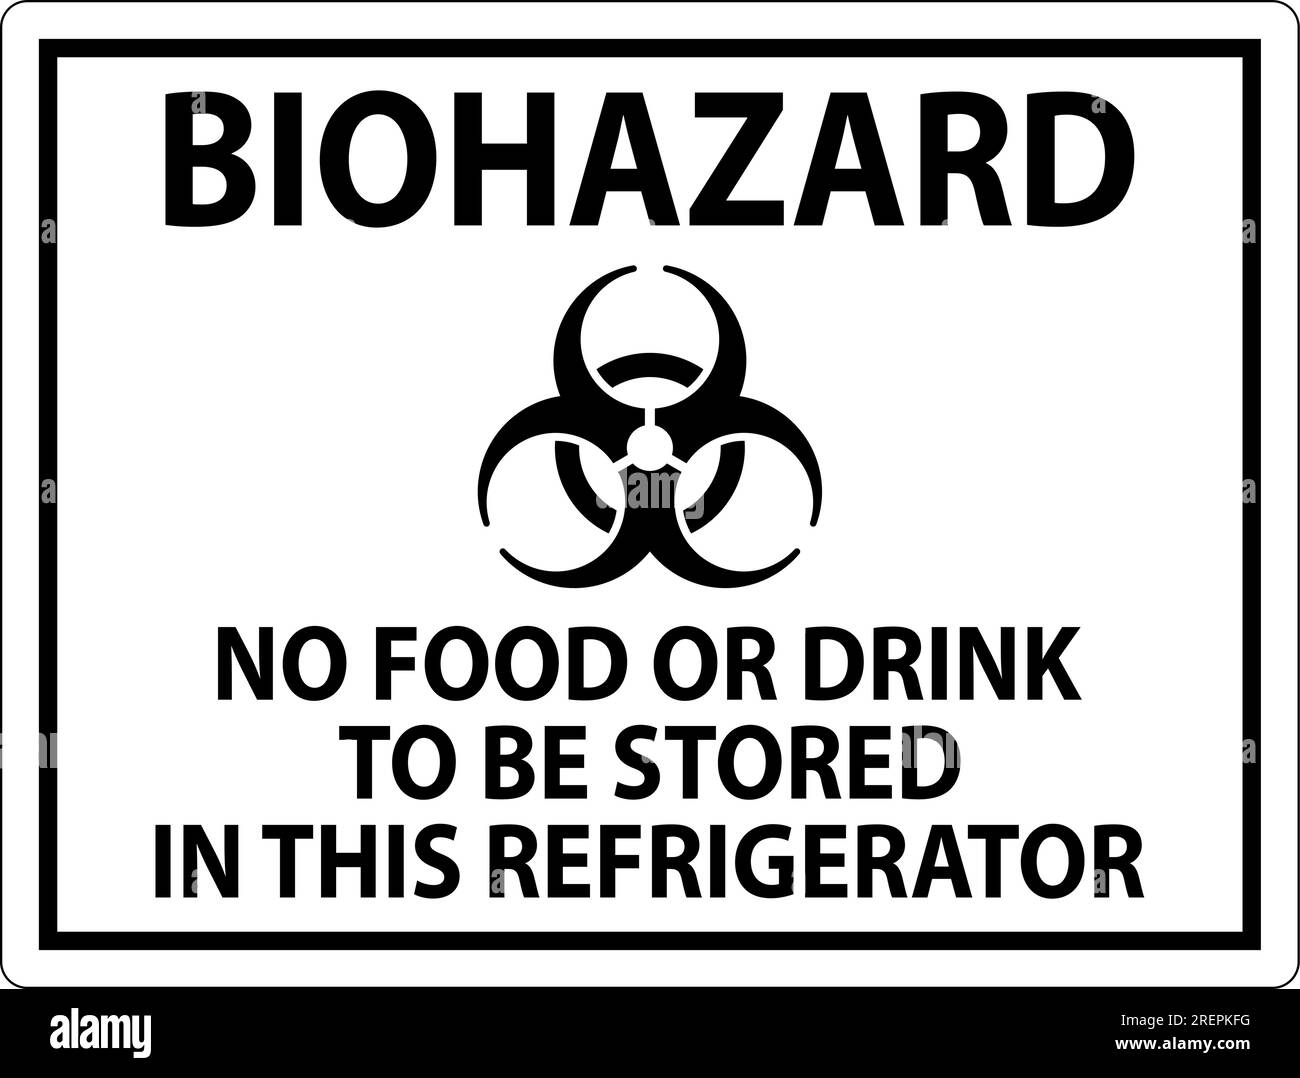 Biohazard Sign No Food Or Drink To Be Stored In This Refrigerator Stock Vector